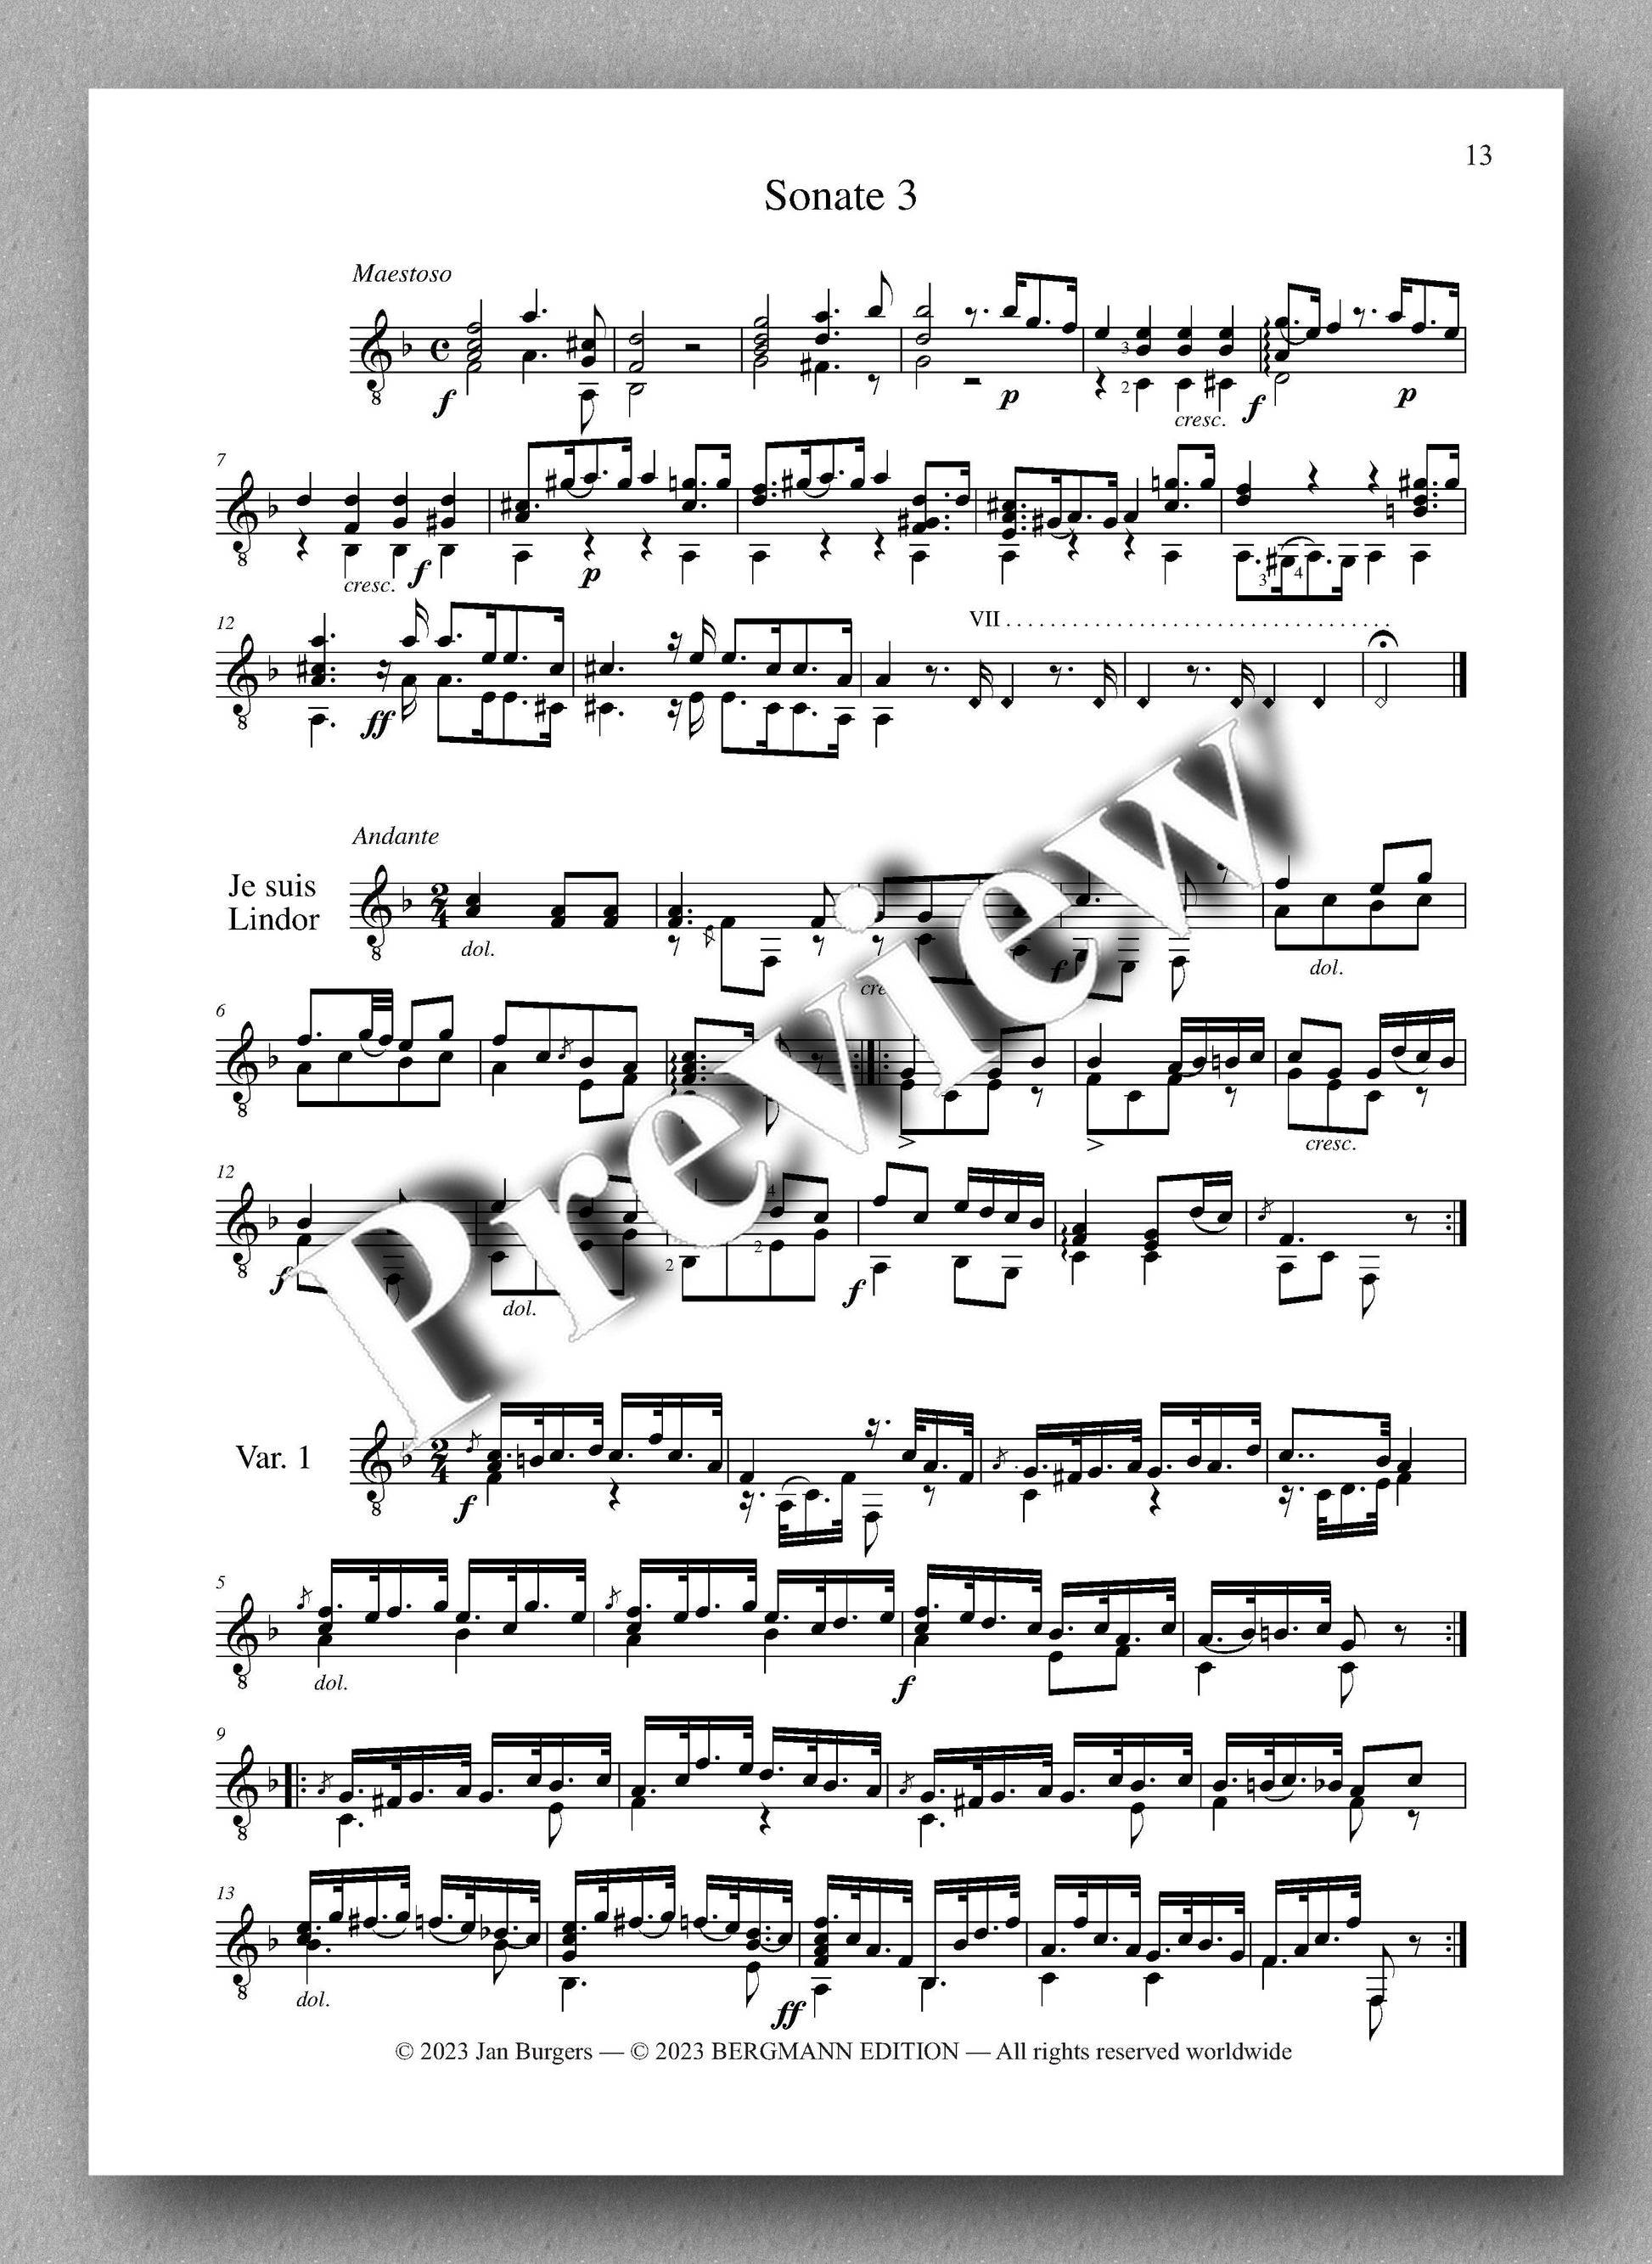 Molino, Collected Works for Guitar Solo, Vol. 18 - preview of the music score 3